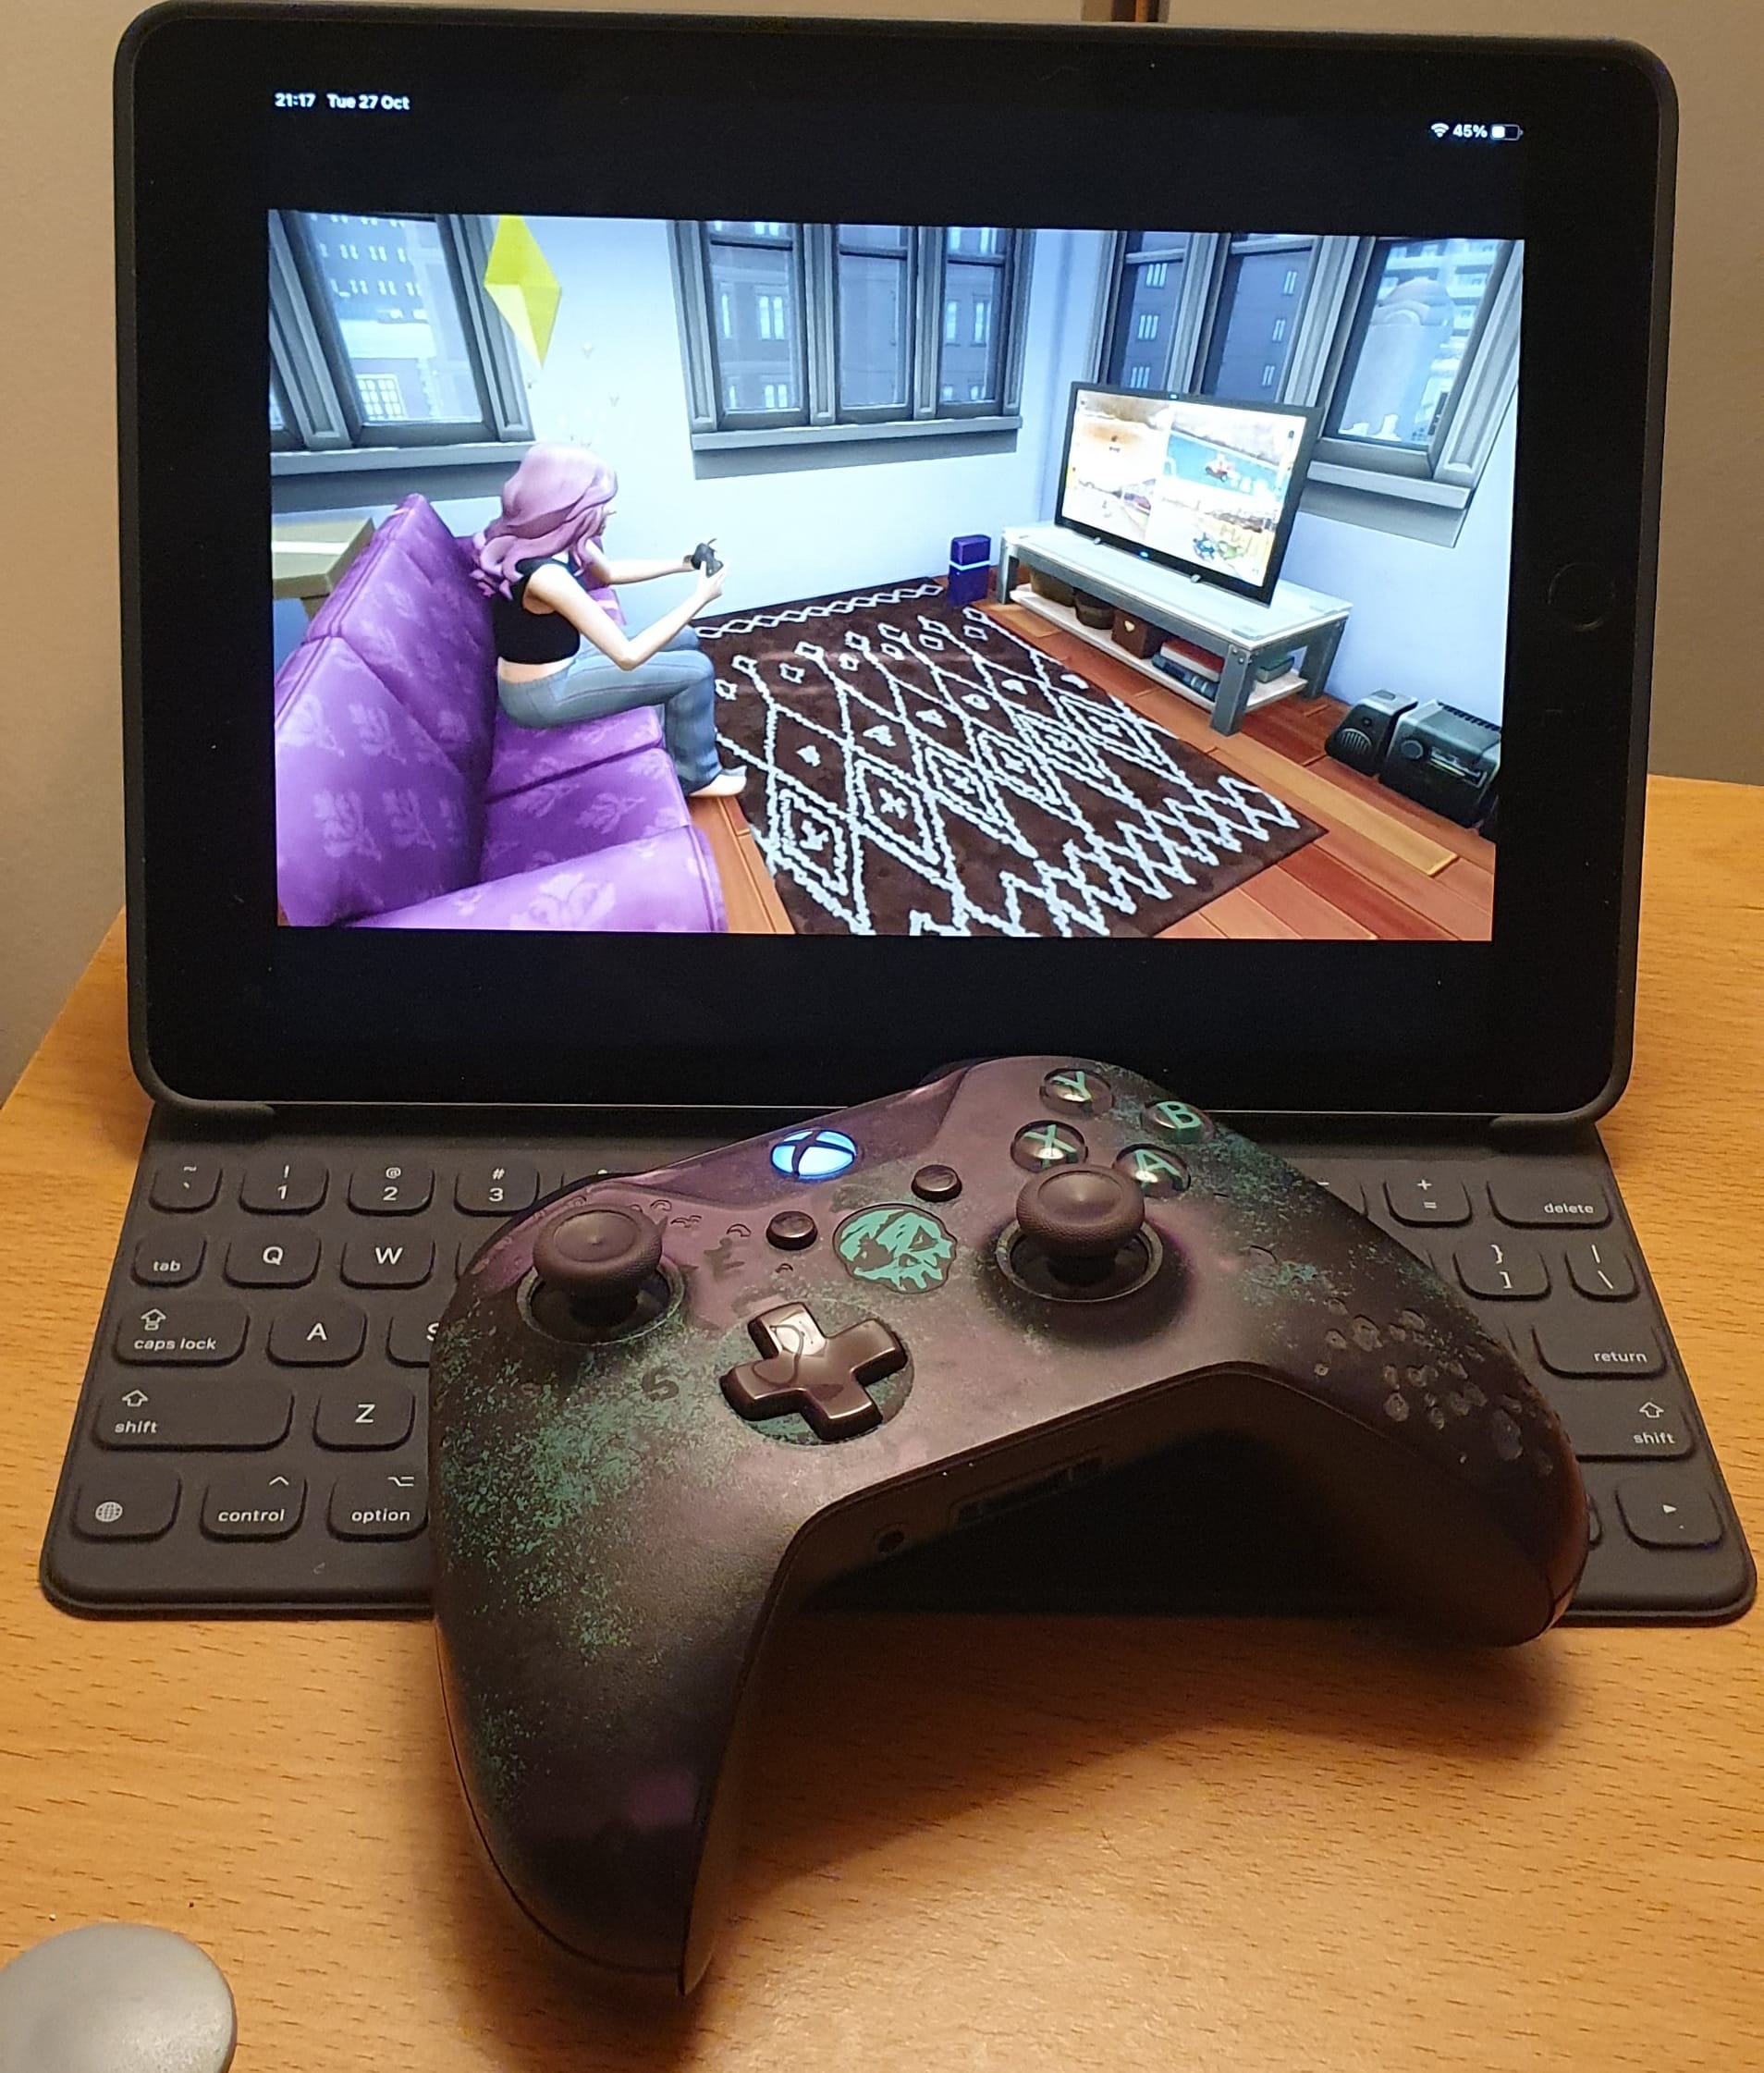 The Sims 4 Console: How To Set Up Remote Play Features For Smart Devices